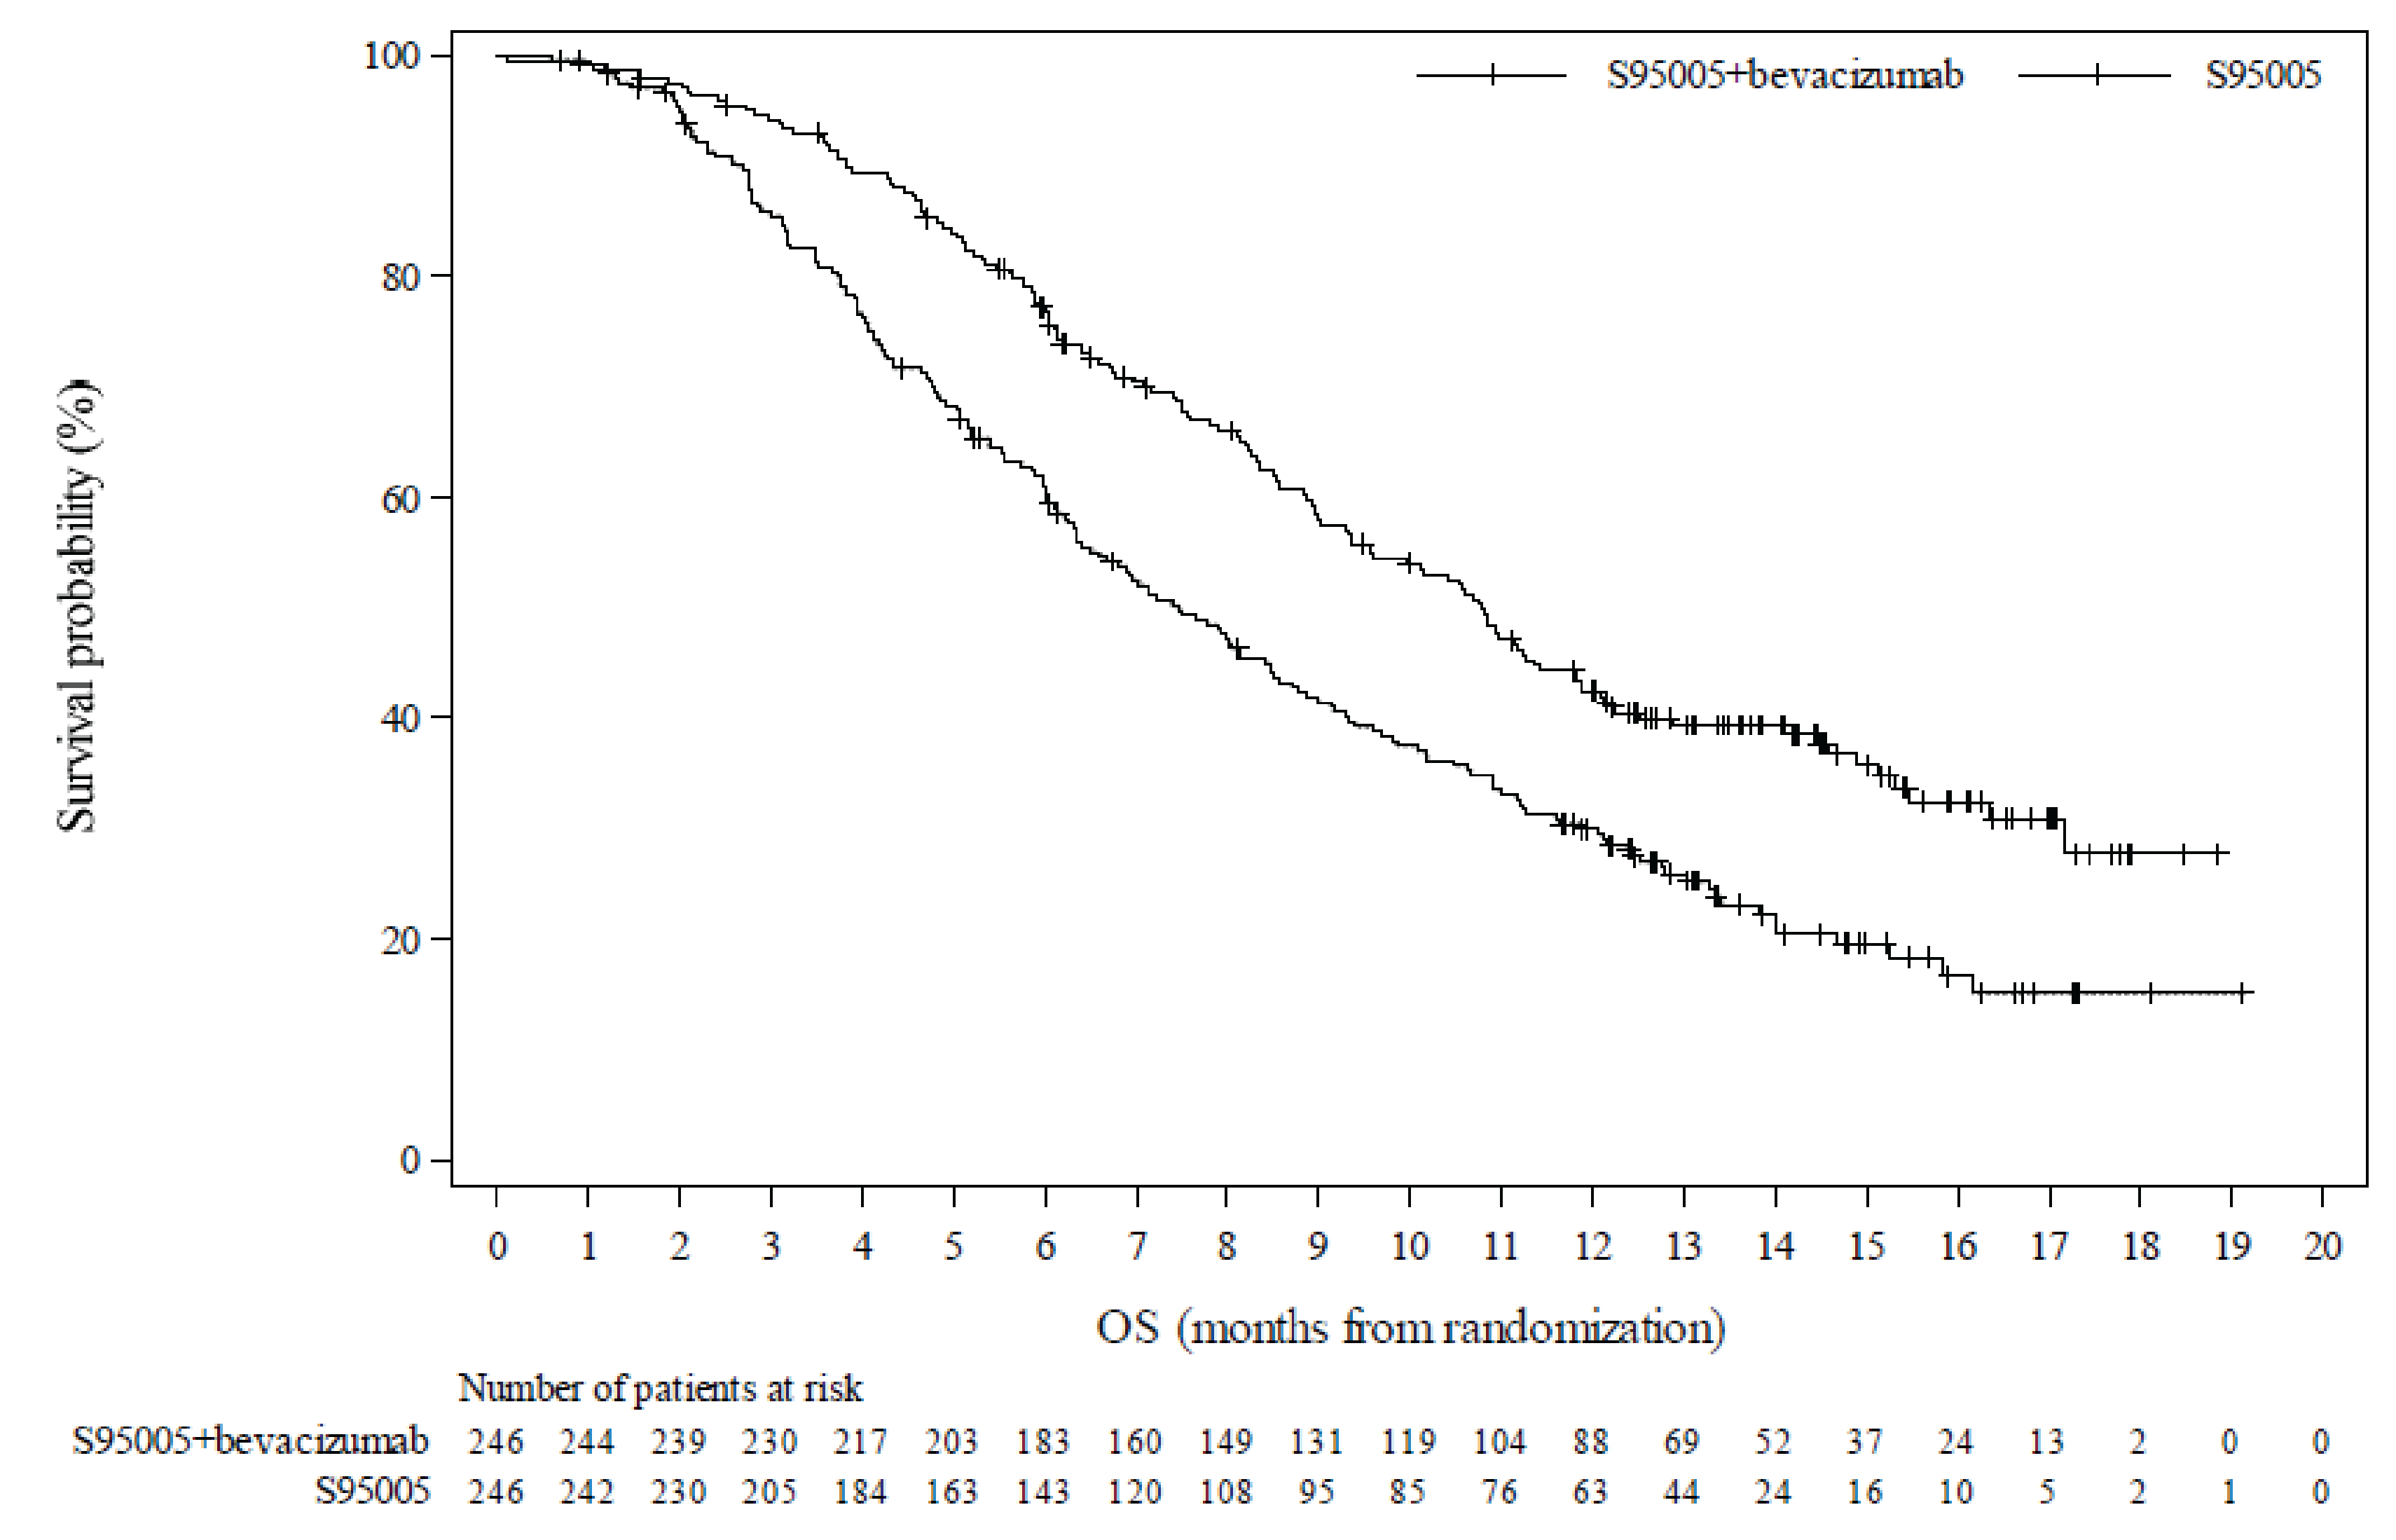 The Kaplan-Meier curves of overall survival showed some crossover early during treatment followed by clear separation at about 2 months after randomization between trifluridine-tipiracil plus bevacizumab compared with trifluridine-tipiracil alone. Median overall survival was 14.5 months for trifluridine-tipiracil plus bevacizumab and 7.8 months for trifluridine-tipiracil alone, with a low number of patients and events.